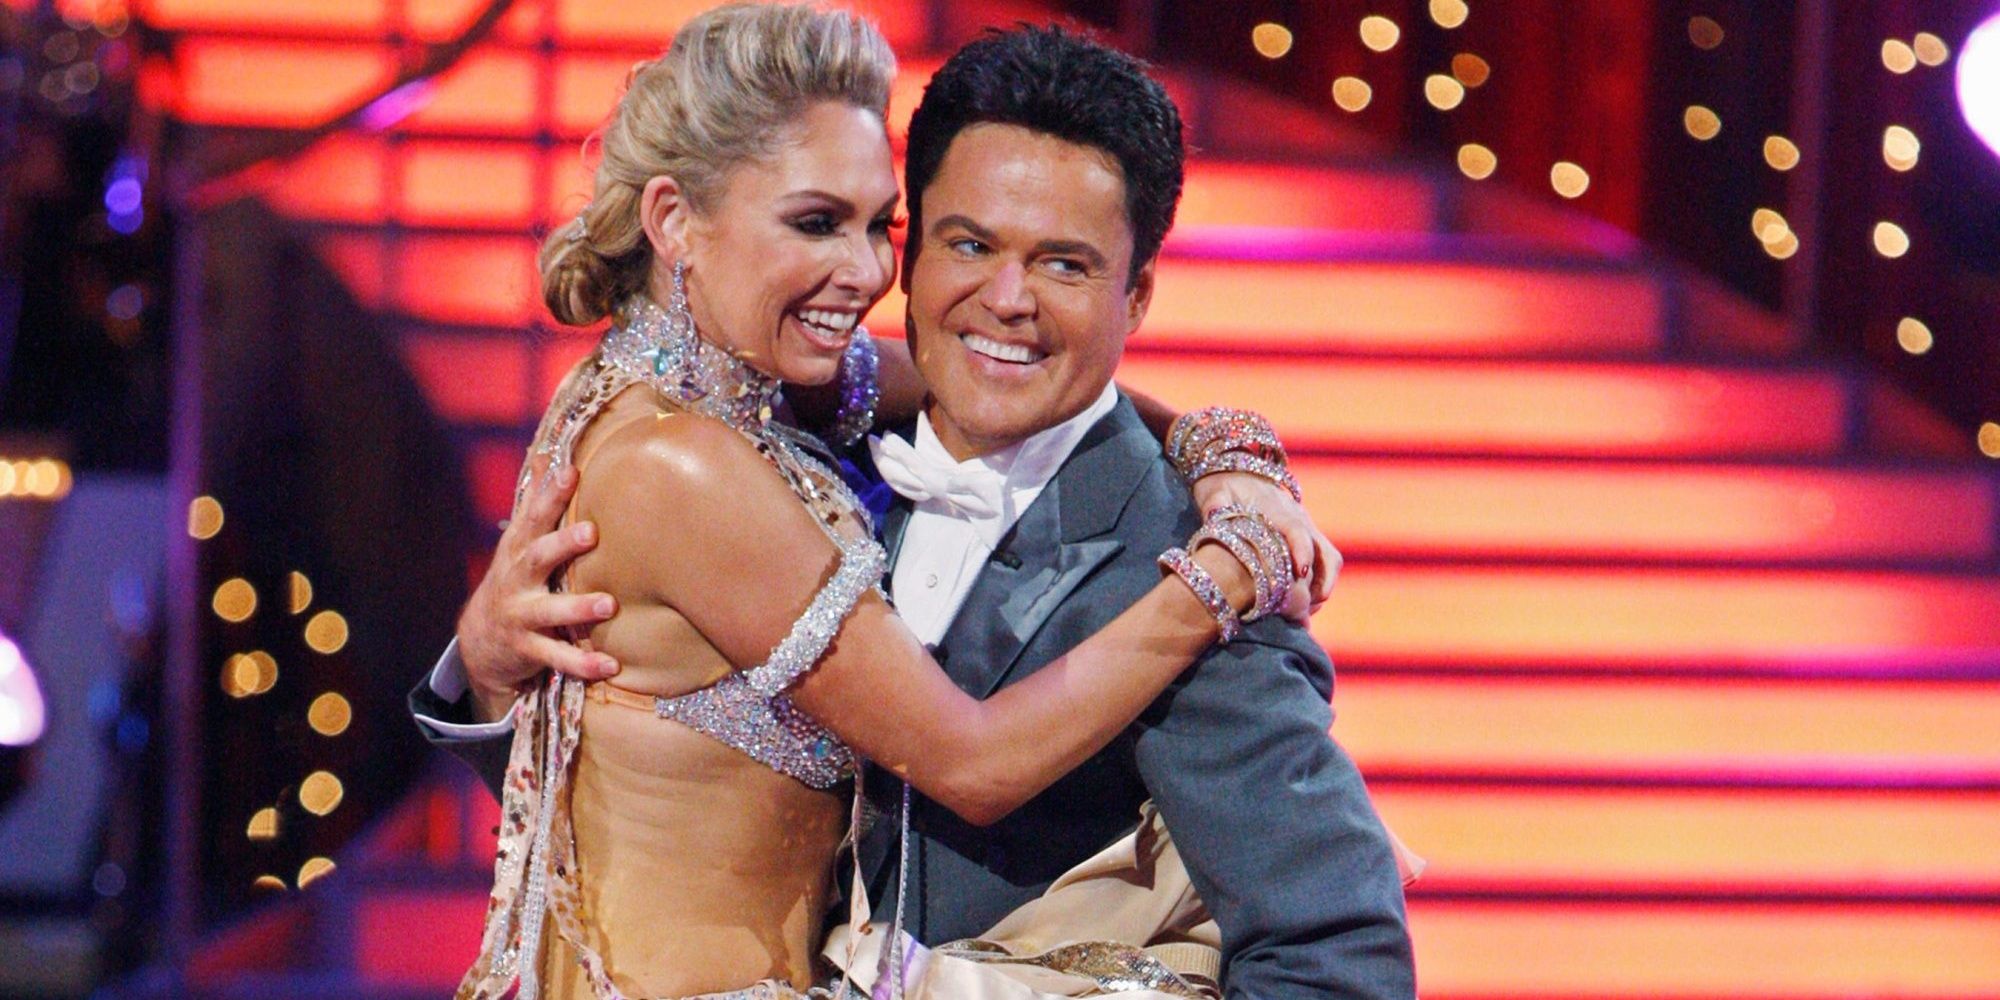 Donny Osmond wins Dancing With The Stars